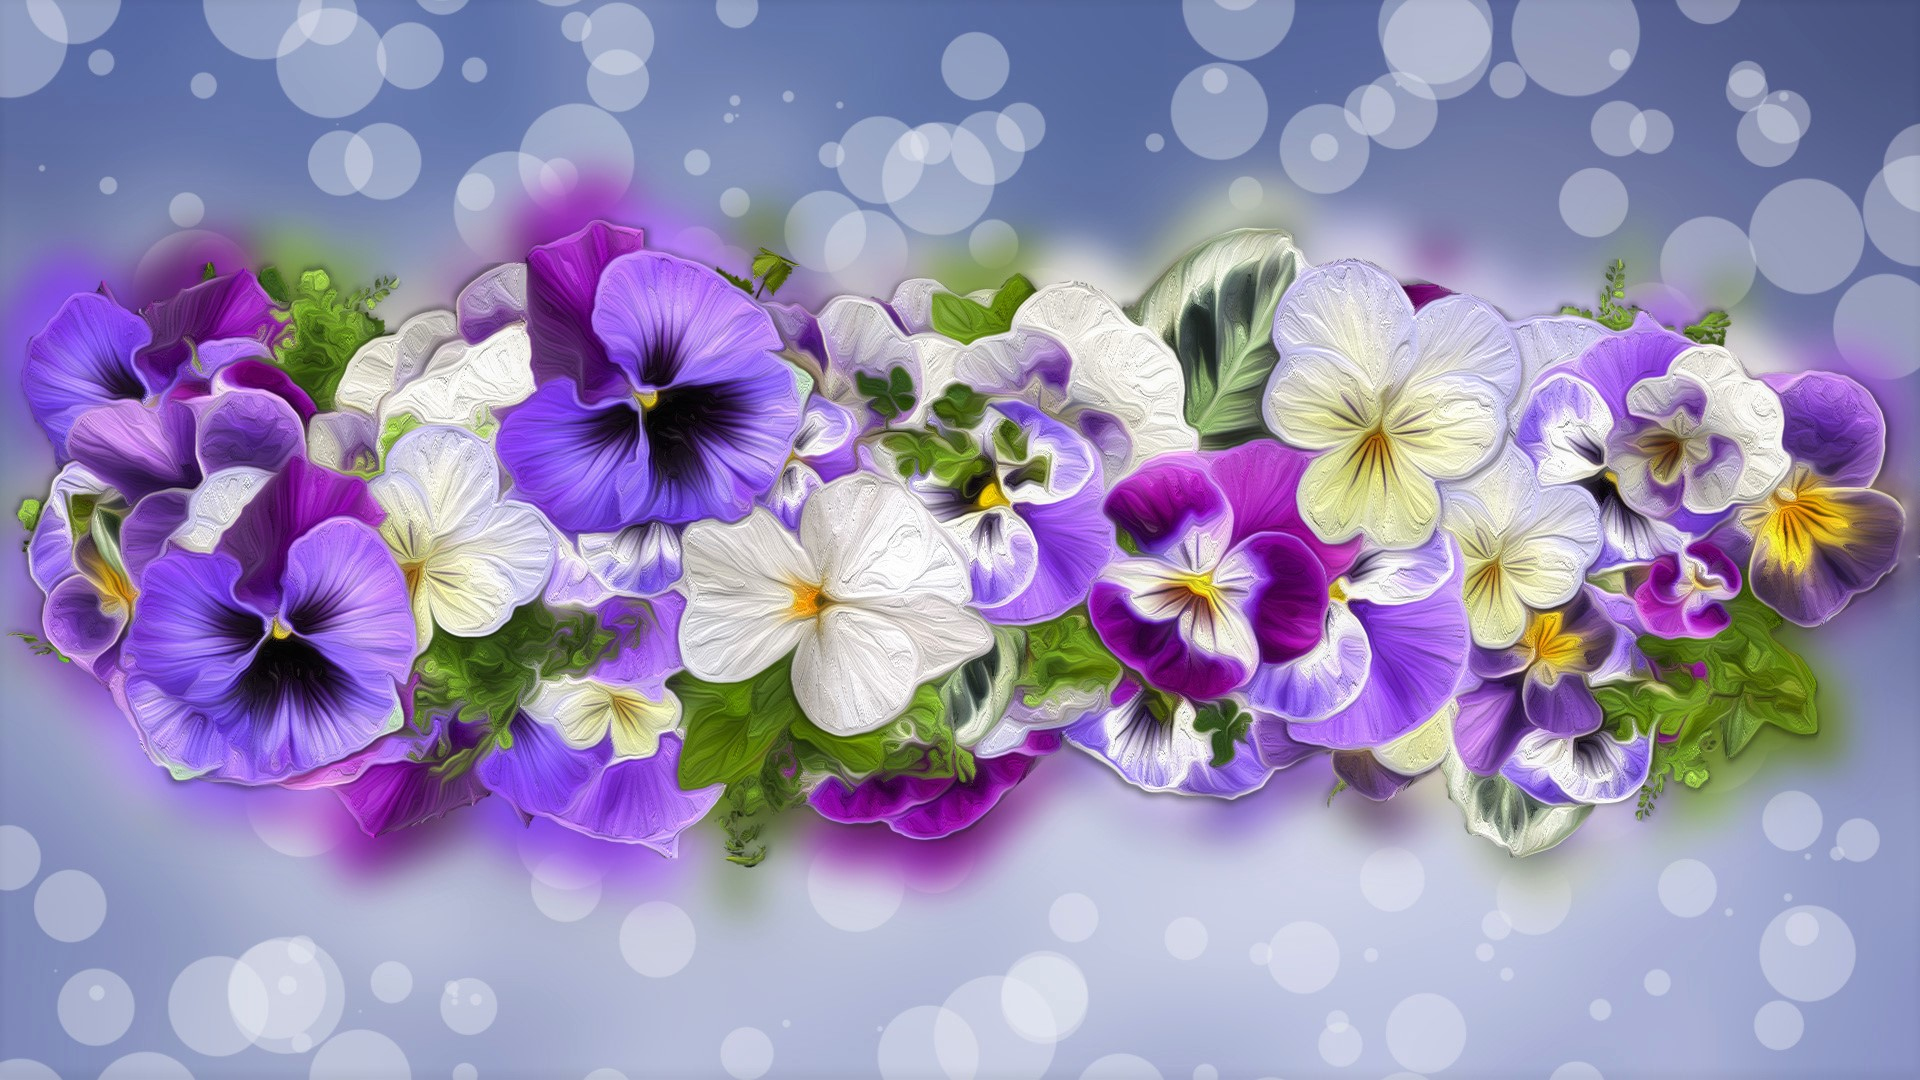 Artistic Colorful Flower Pansy 1920x1080